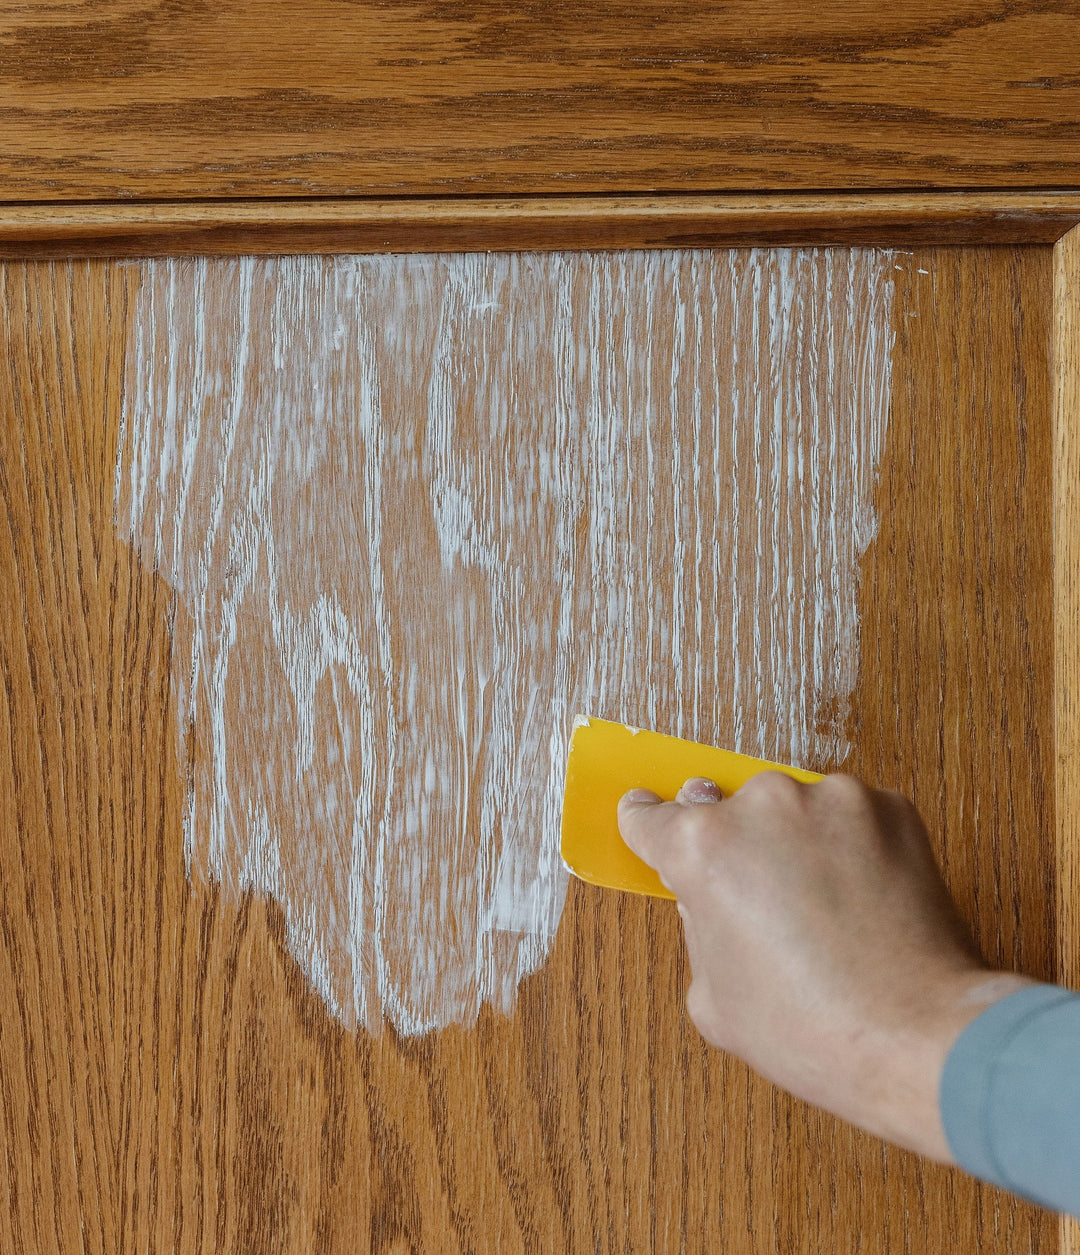 Aqua Coat grain filler being applied to wood cabinet with a yellow sponge